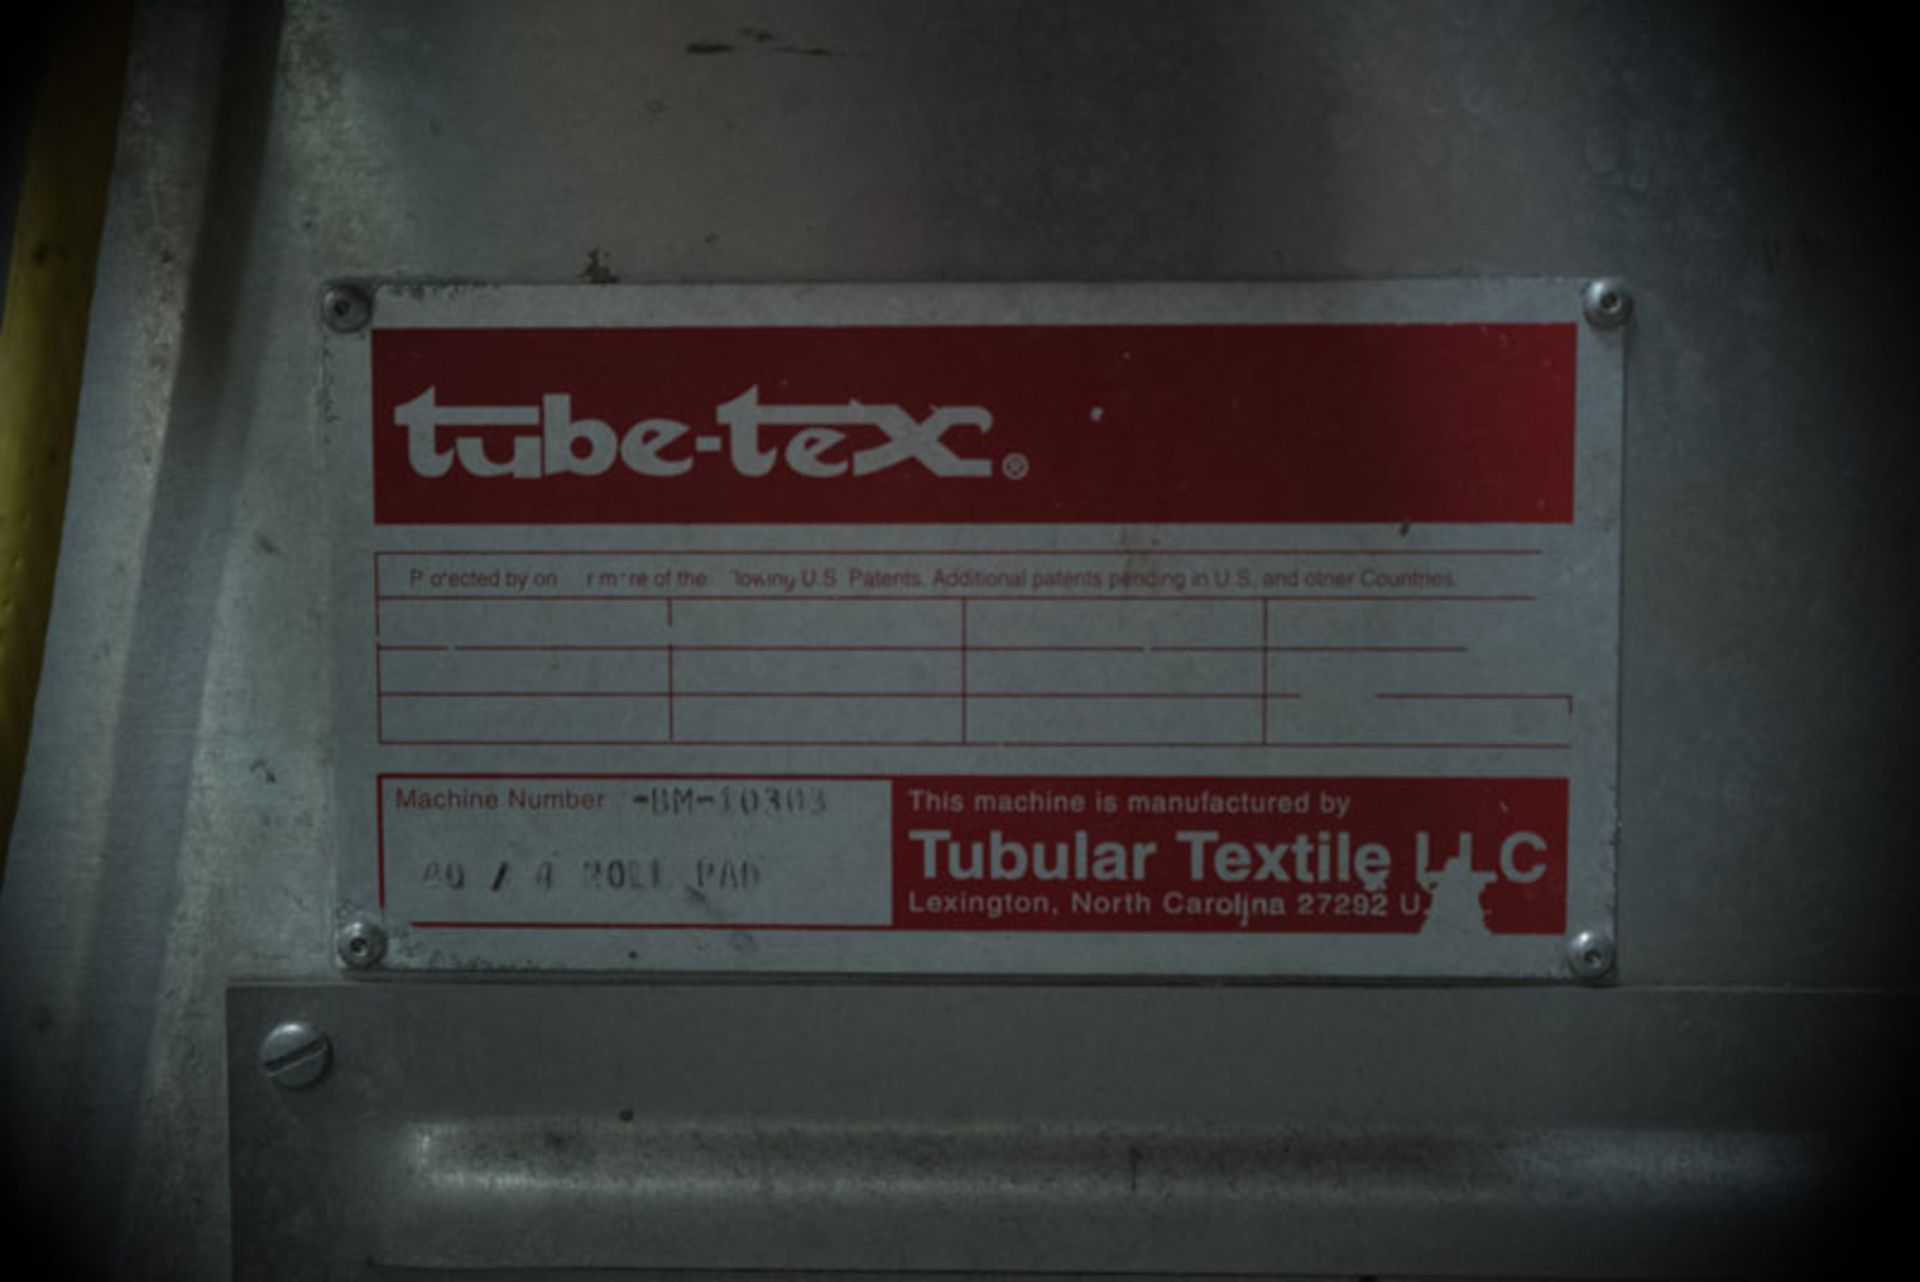 Tubetex Delta Plus 4-50 4 Roll Extraction Pad SER#BM10303 Year 2008 40” wide consisting of: 60” - Image 10 of 10